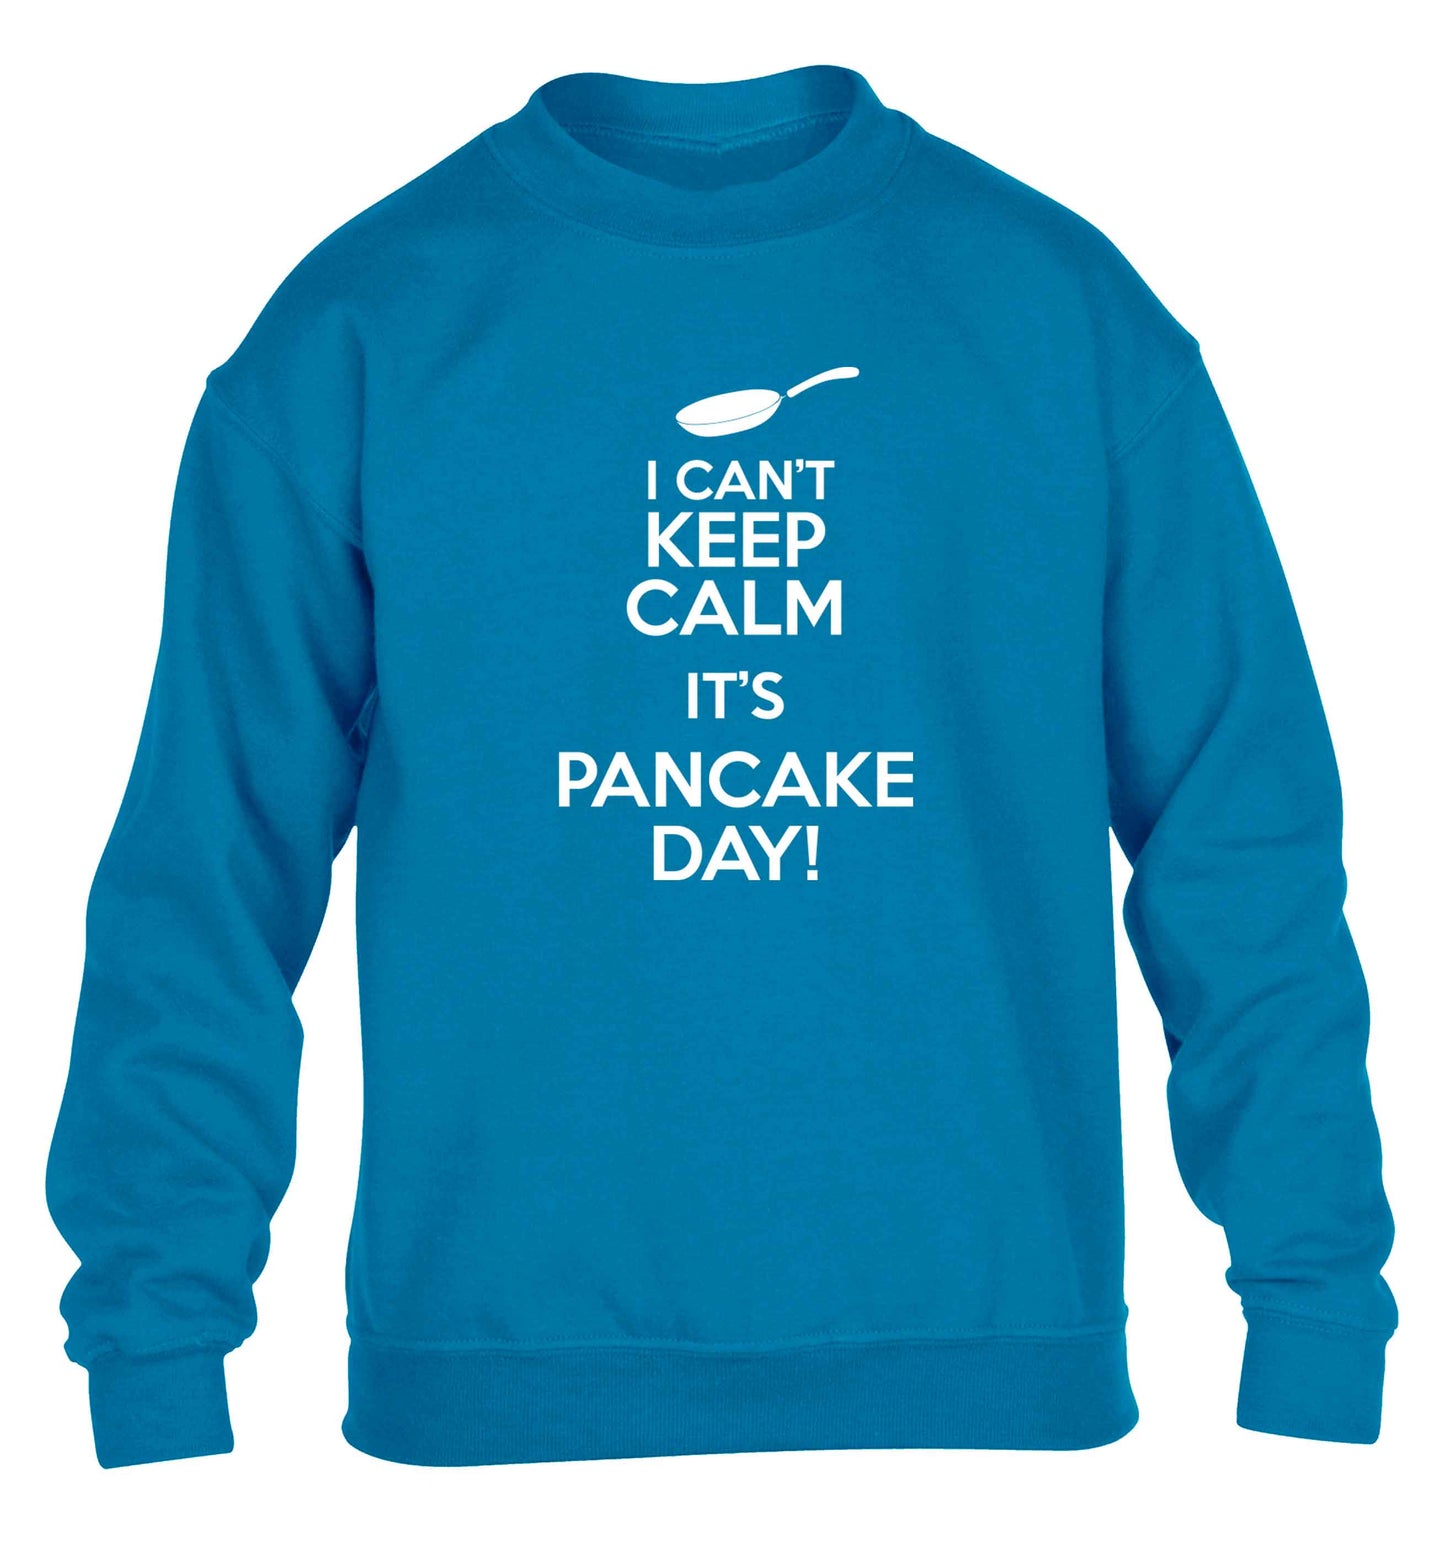 I can't keep calm it's pancake day! children's blue sweater 12-13 Years